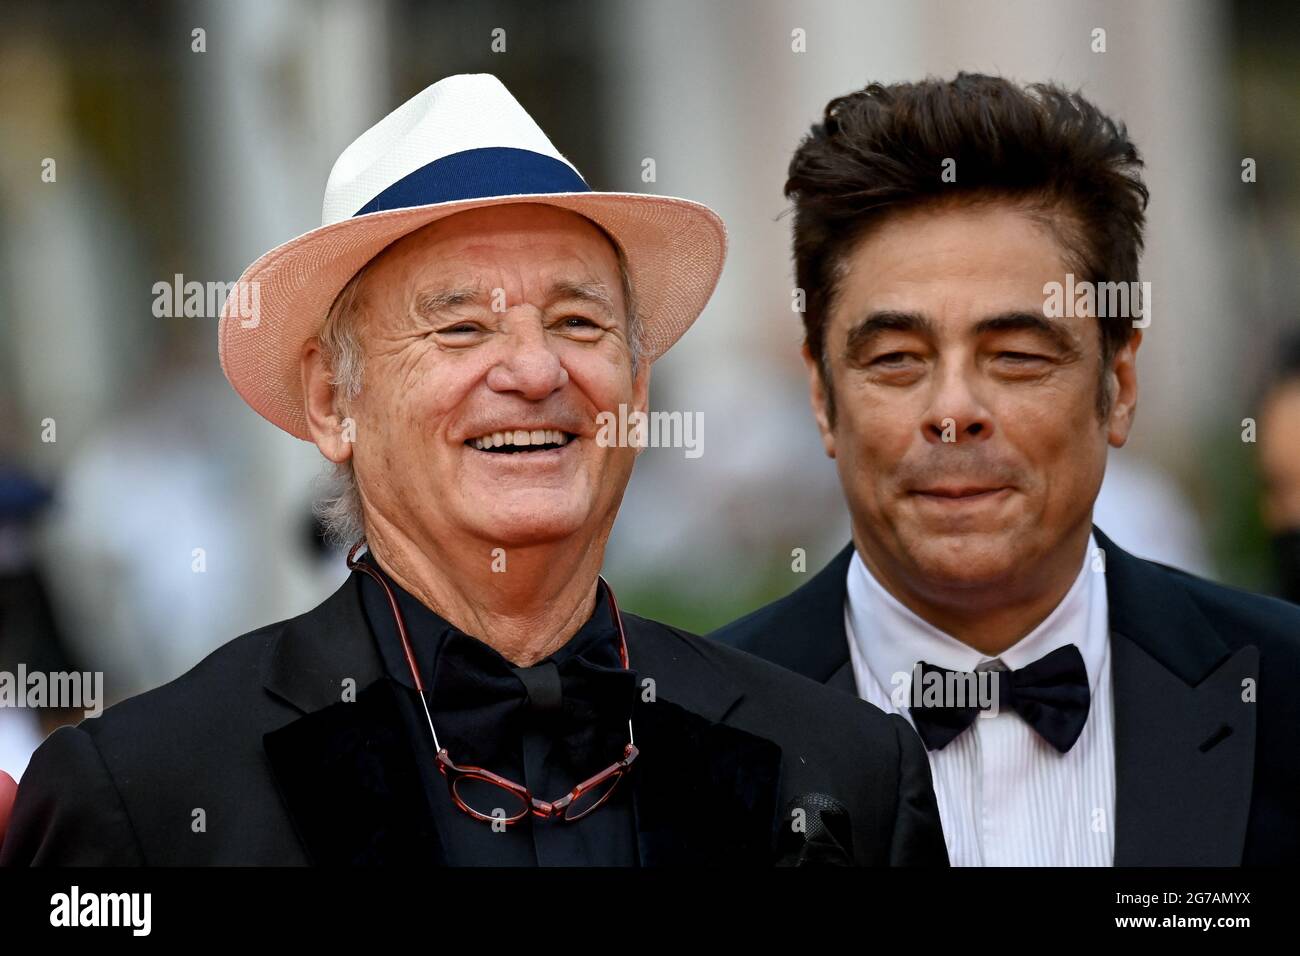 Cannes, France. 12th July, 2021. Bill Murray, Benicio Del Toro attending the premiere of the movie The French Dispatch during the 74th Cannes Film Festival in Cannes, France on July 12 2021. Photo by Julien Reynaud/APS-Medias/ABACAPRESS.COM Credit: Abaca Press/Alamy Live News Stock Photo